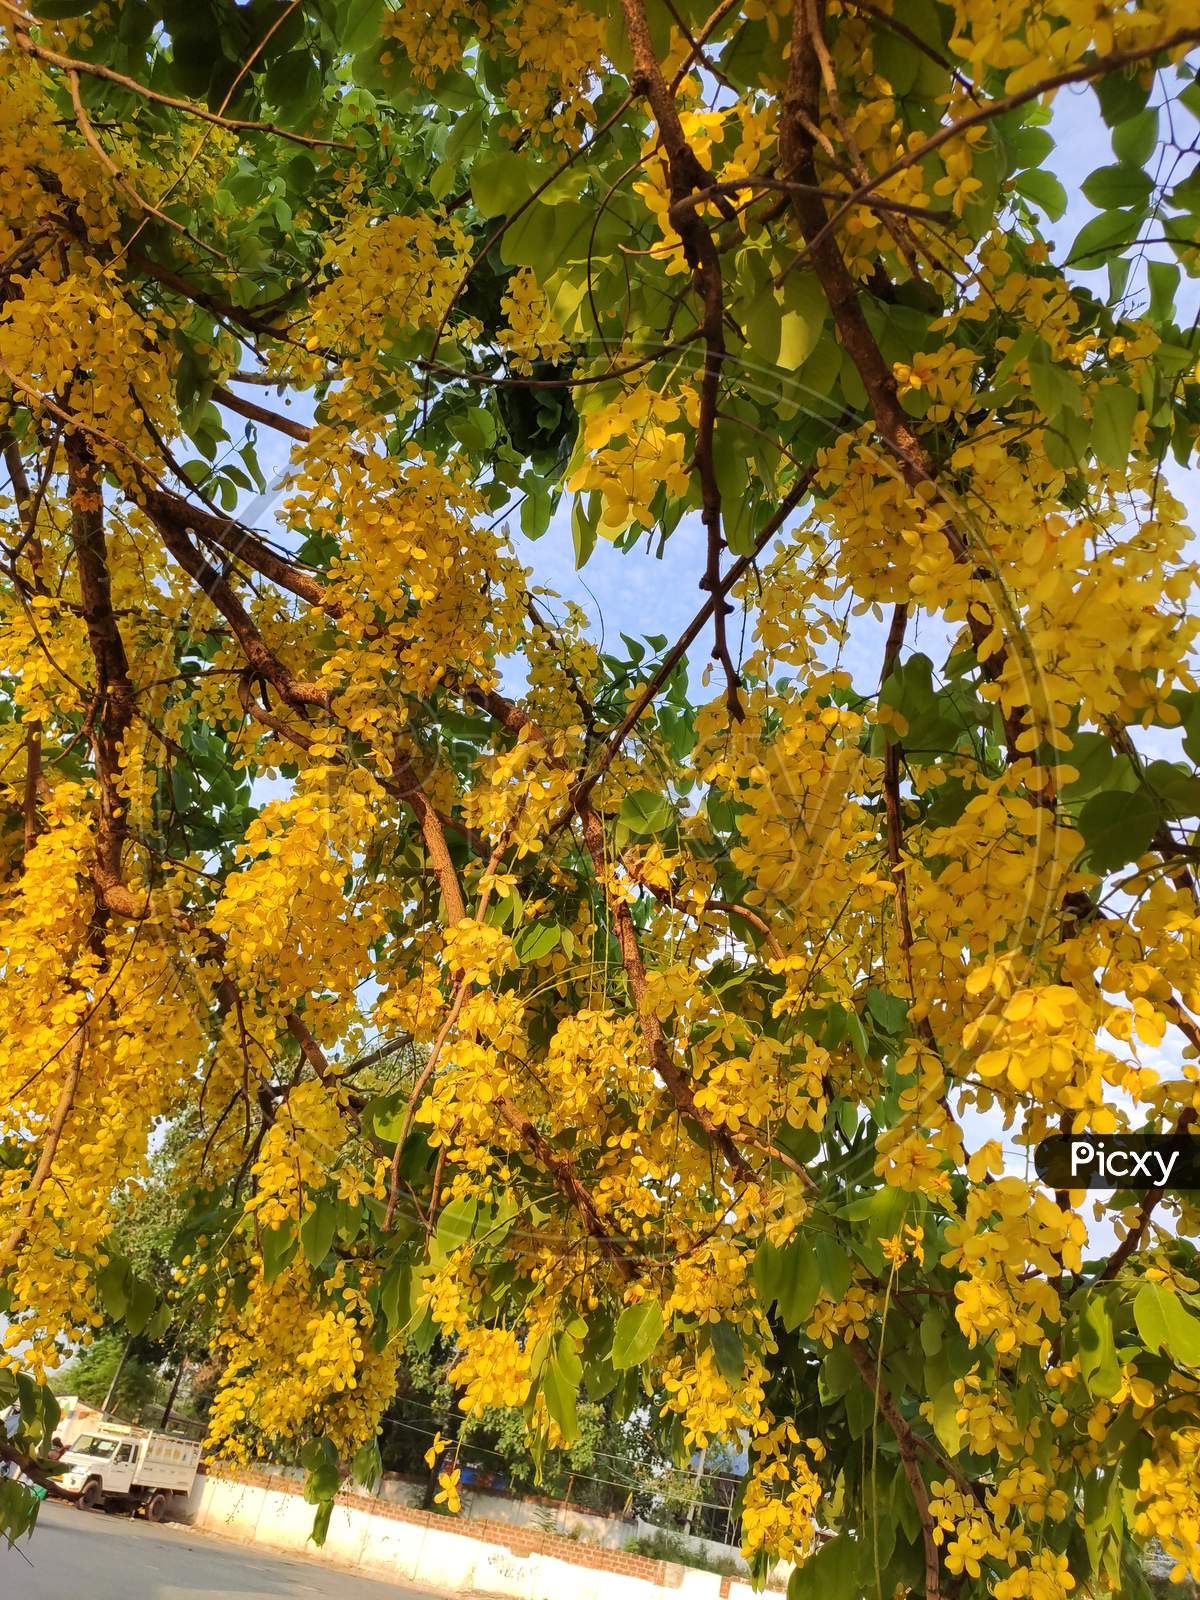 Cassia fistula also known as golden showers